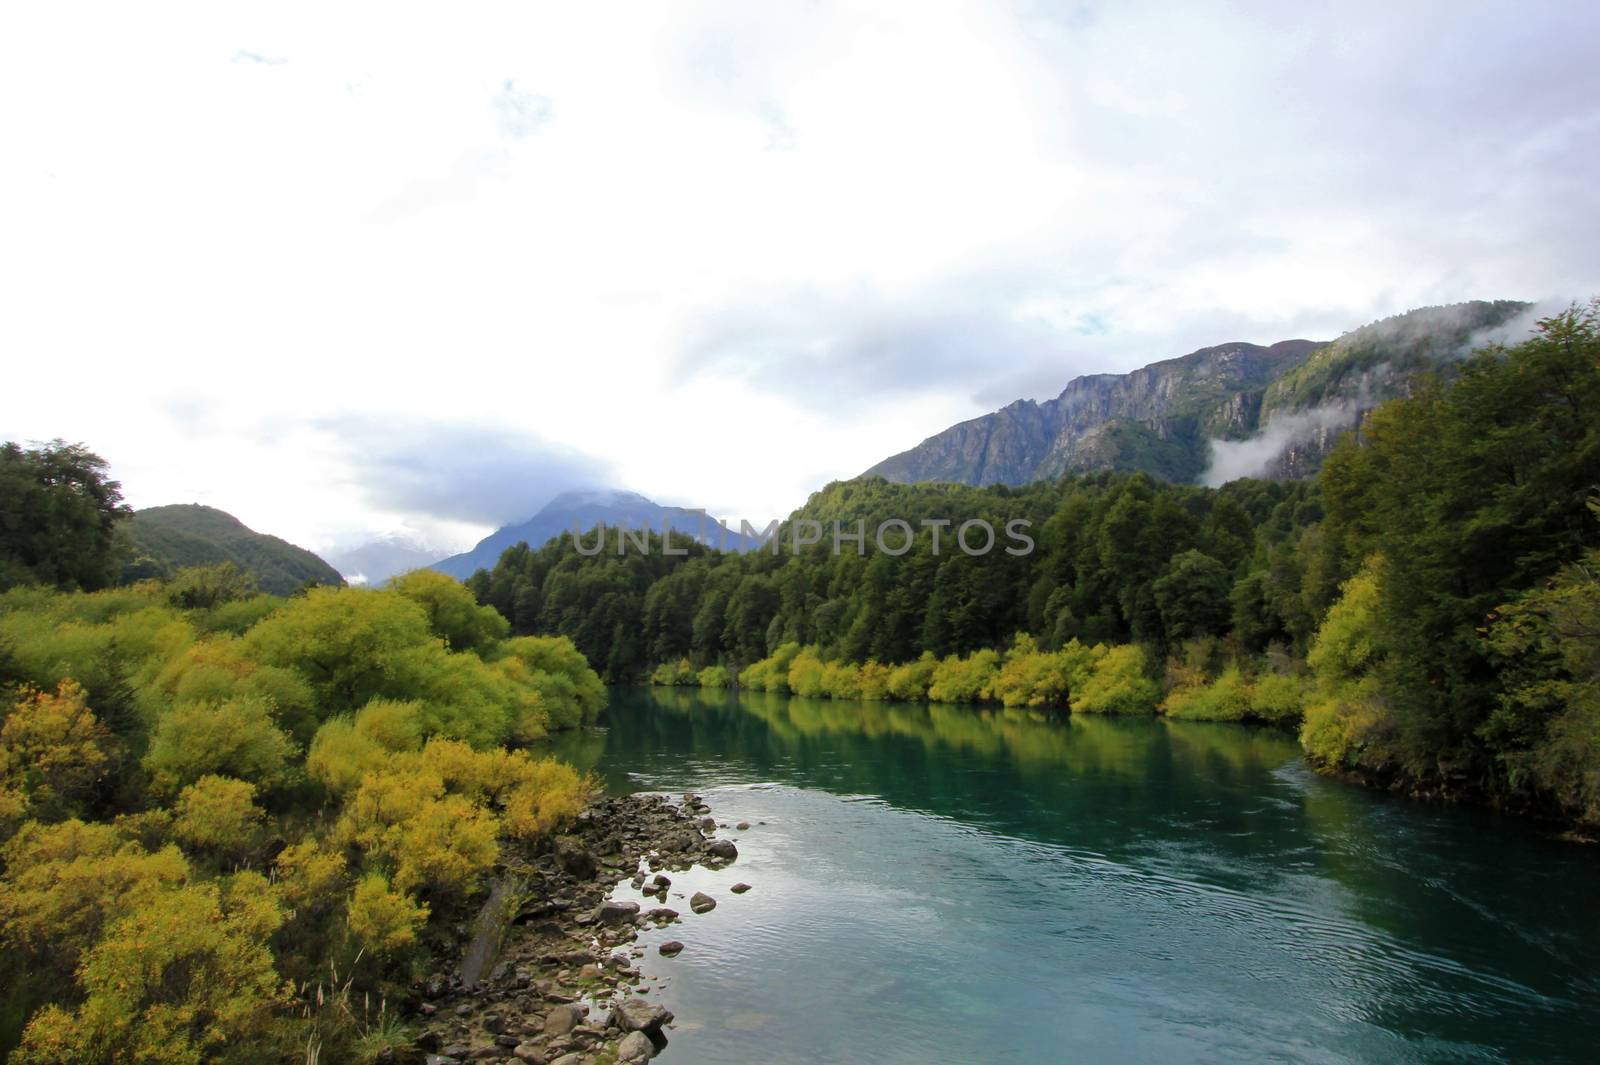 River Futaleufu flowing, well known for white water rafting, Patagonia, southern Chile.